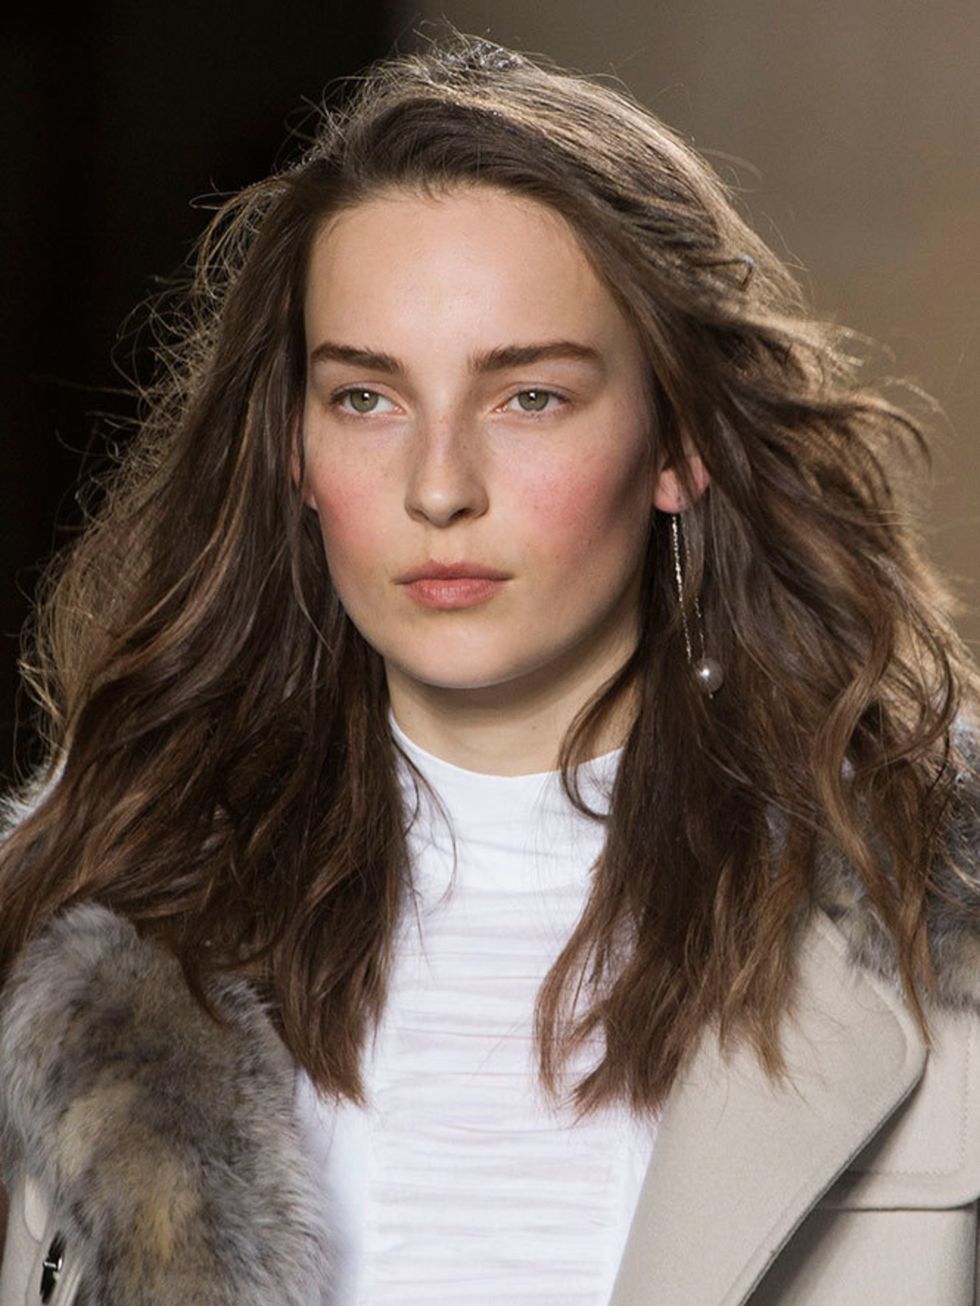 <p><a href="http://www.elleuk.com/catwalk/unique/autumn-winter-2015"><strong>Topshop Unique</strong></a></p>

<p>The look: Windswept mane</p>

<p>Hair stylist: Anthony Turner for LOréal Professionnel</p>

<p>Key products: LOreal Professionnel TecniART P